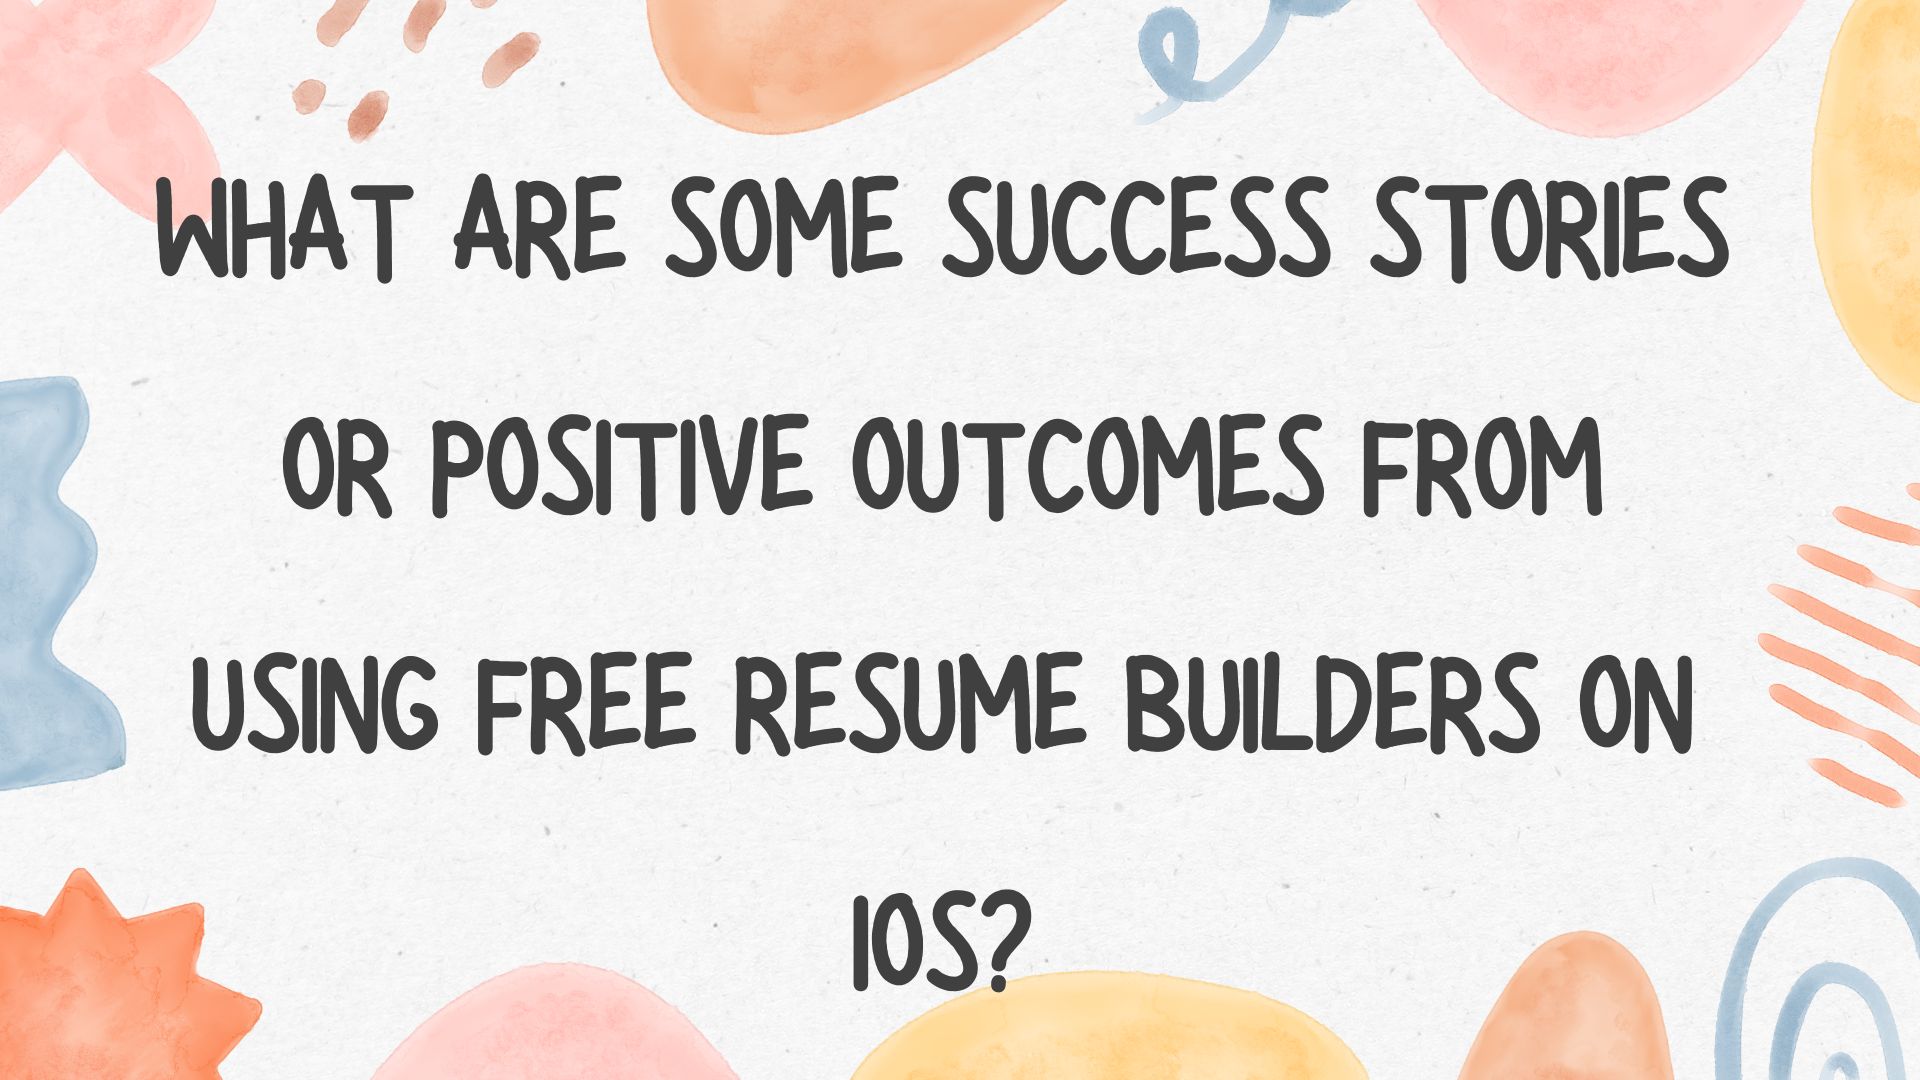 Mastering Your Resume: Free Builders on iOS